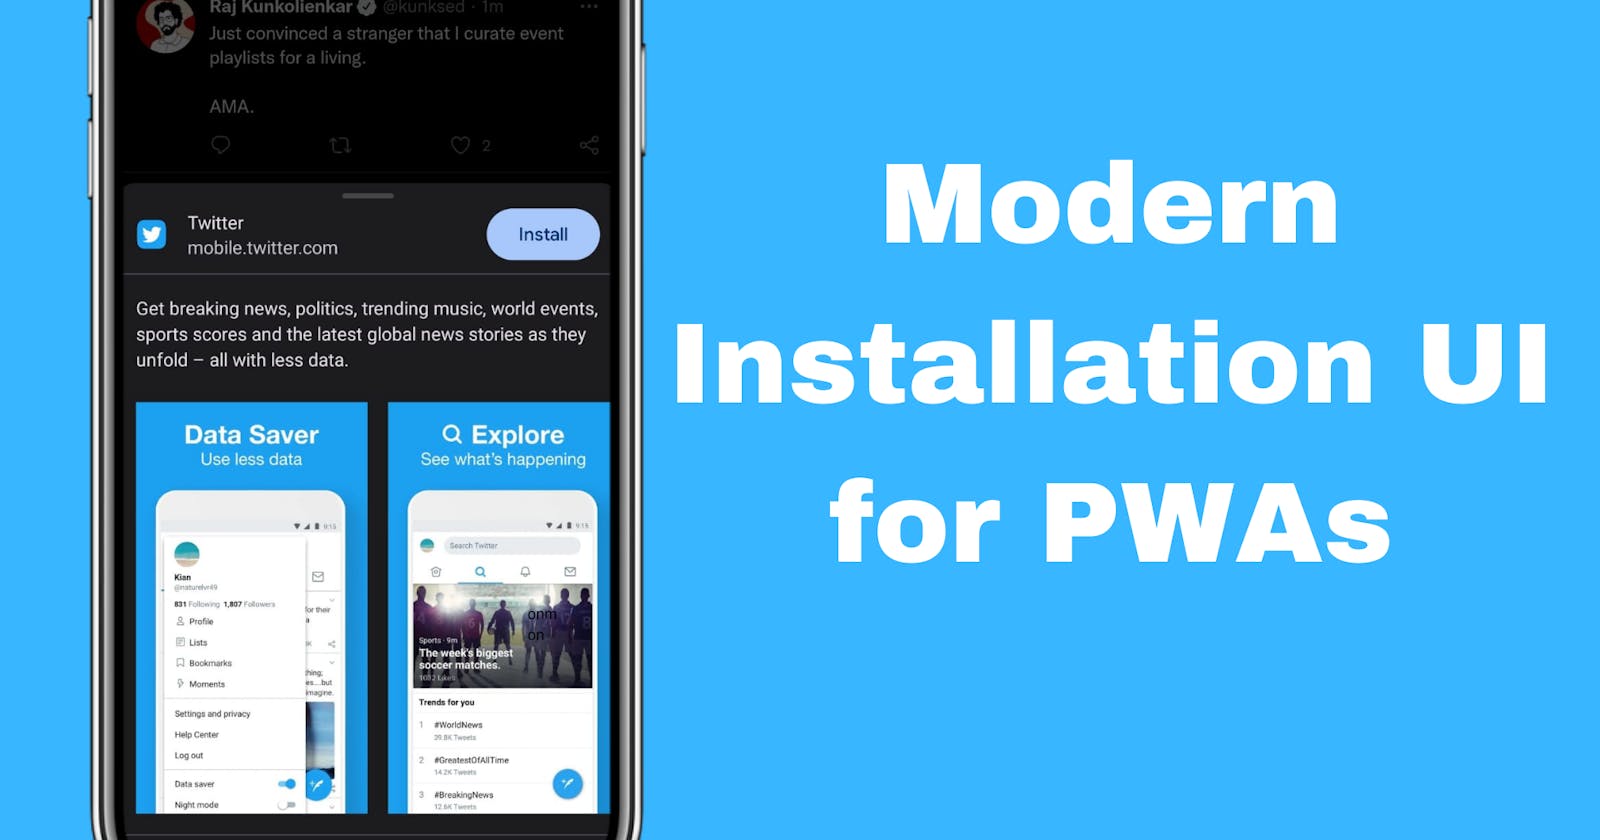 How to add Modern Installation UI for your PWA